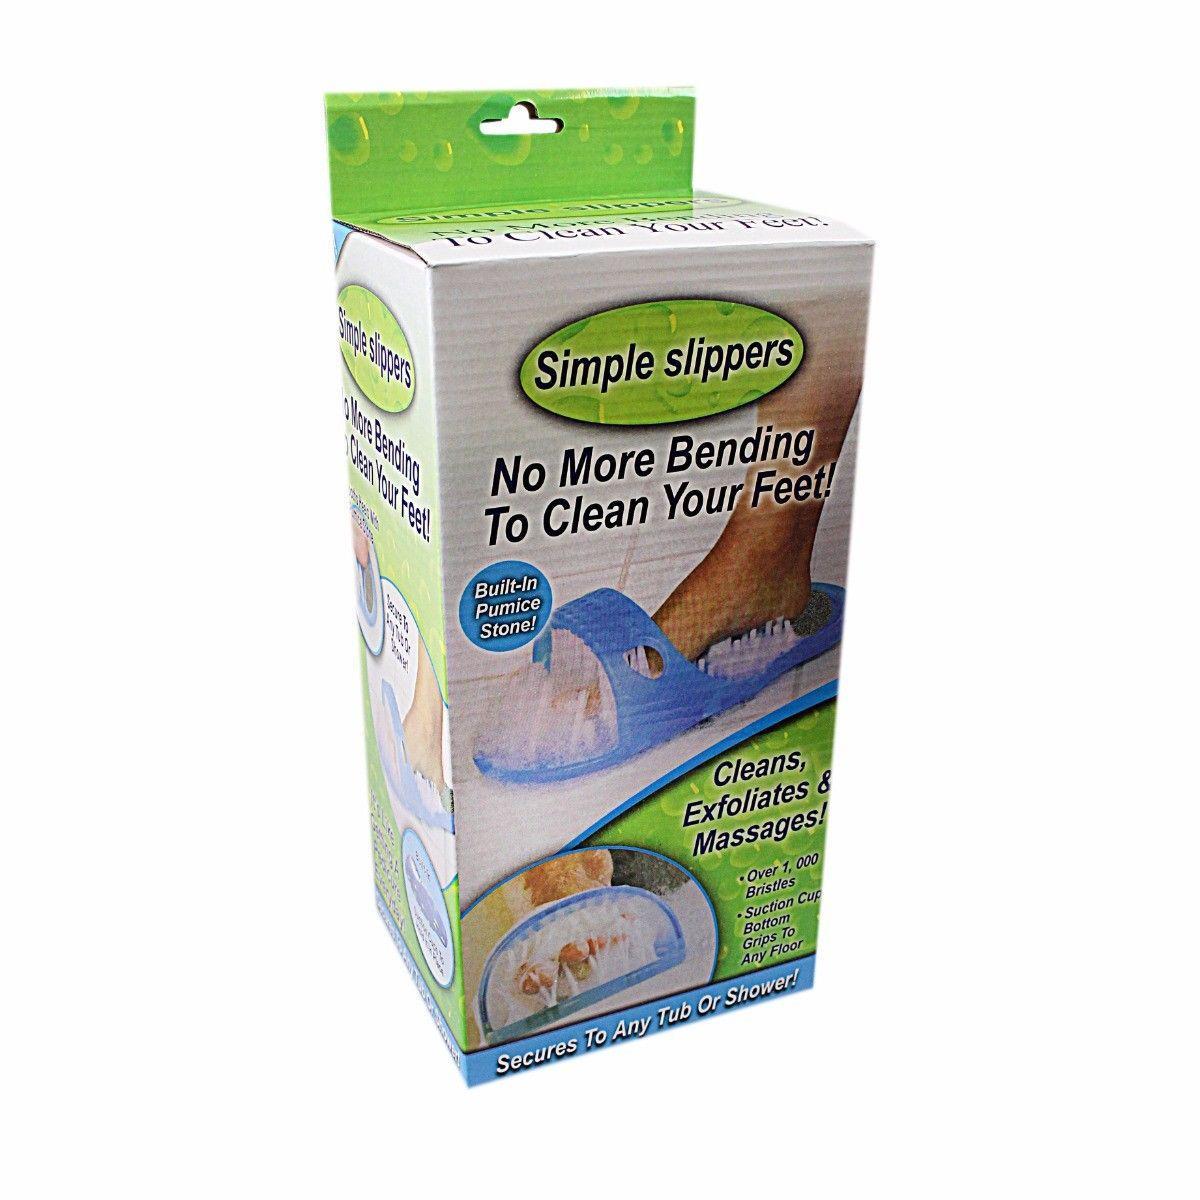 Simple Slippers No More Bending To Clean Your Feet Built In Pumice Stone Health 4510 (Parcel Rate)